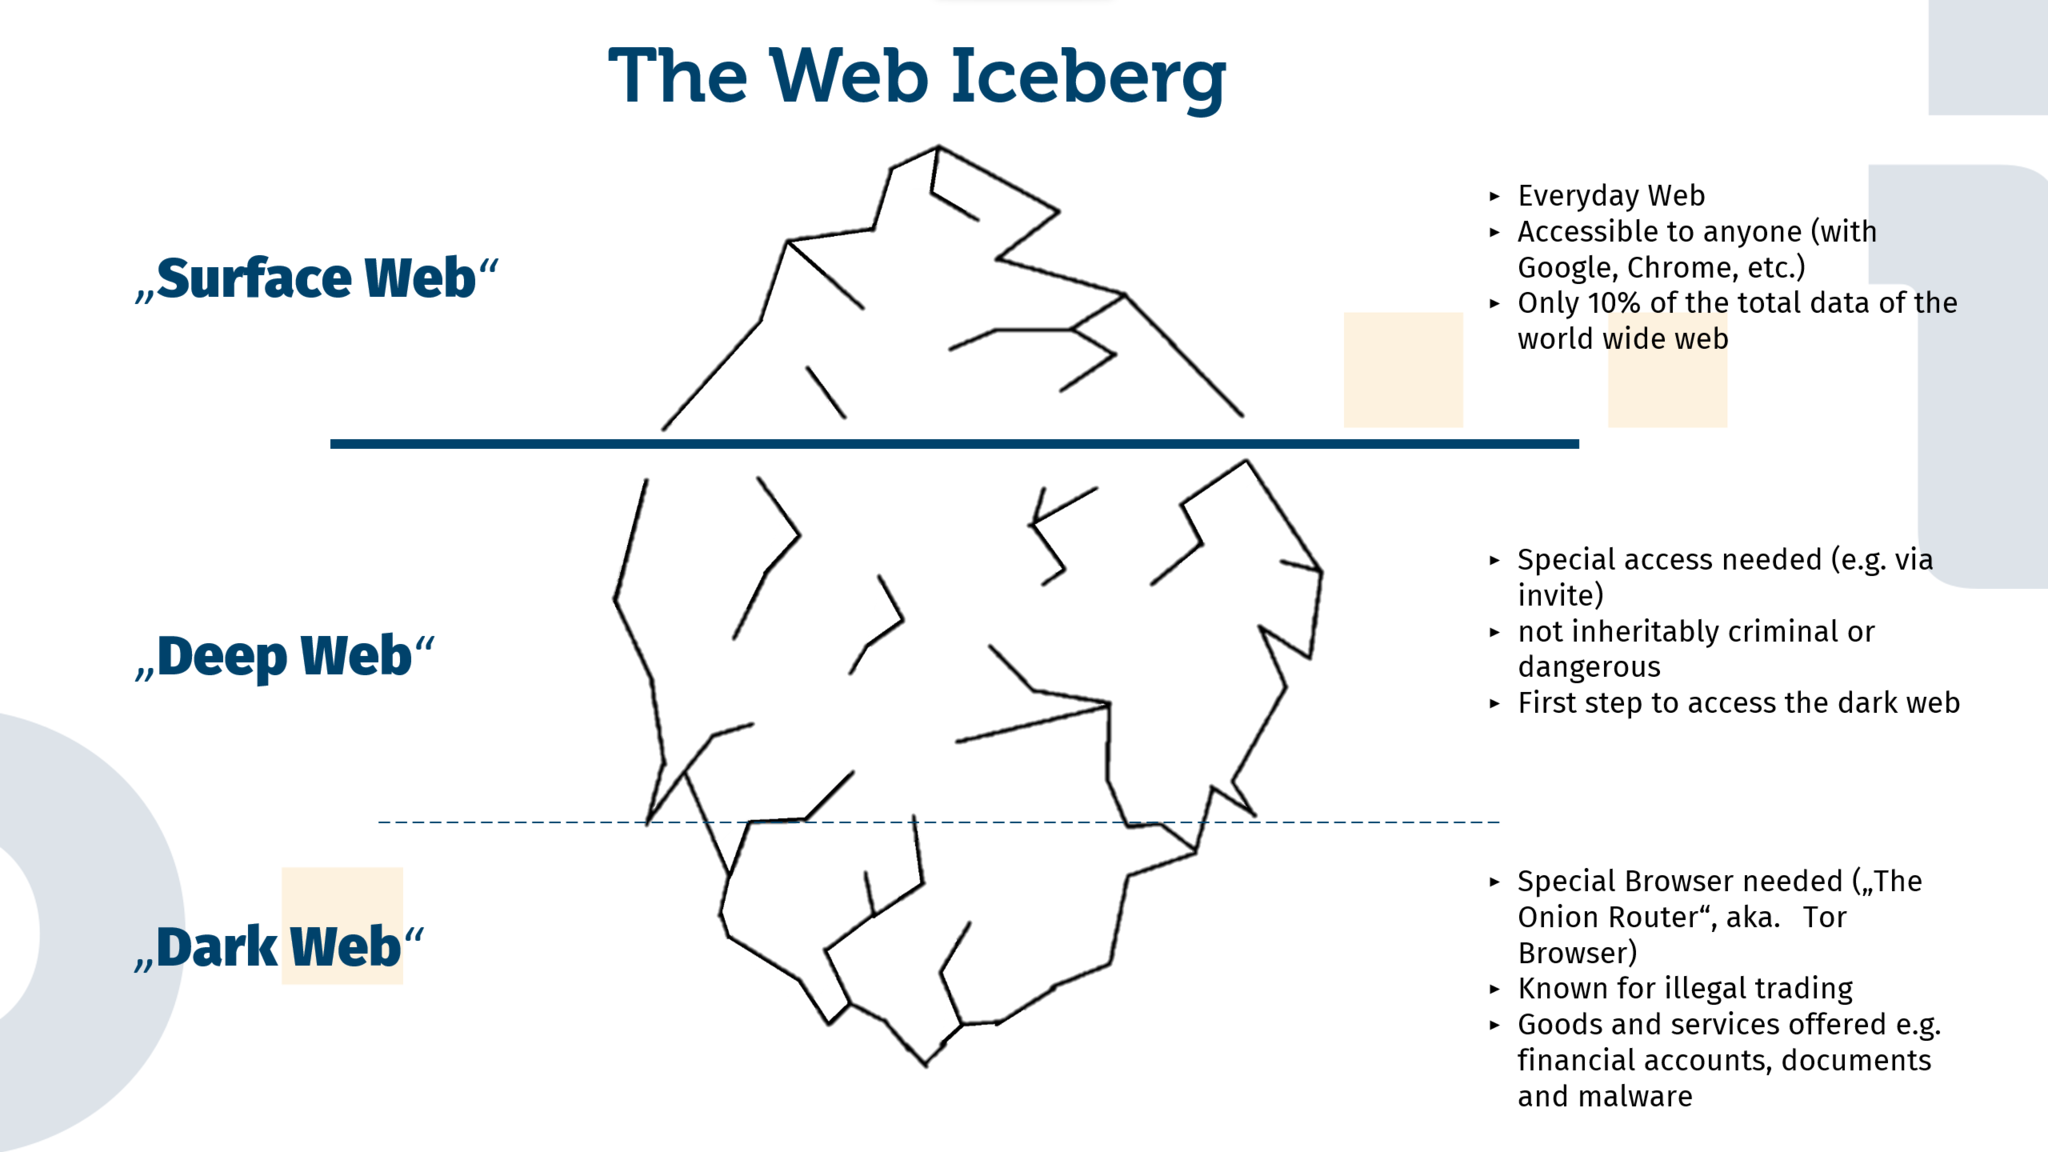 Representation of a three-part iceberg. The superficial tip is called the Surface Web. The so-called everyday web, accessible with common browsers (e.g. Chrome, Edge, etc.). It comprises only 10% of the total data volume of the Word Wide Web. The first level underwater is called the Deep Web. There are special requirements to access it (e.g., invitation). Basically, this secluded area is not dangerous or criminal. You can find the first addresses and links to advance into the dark web. The lowest level of the iceberg is assigned to the Dark Web. For access, a special browser is needed (The Onion Router, called Tor Browser), it is well known for illegal activity in principle and allows the purchase of accounts, bank accounts, documents and malware.